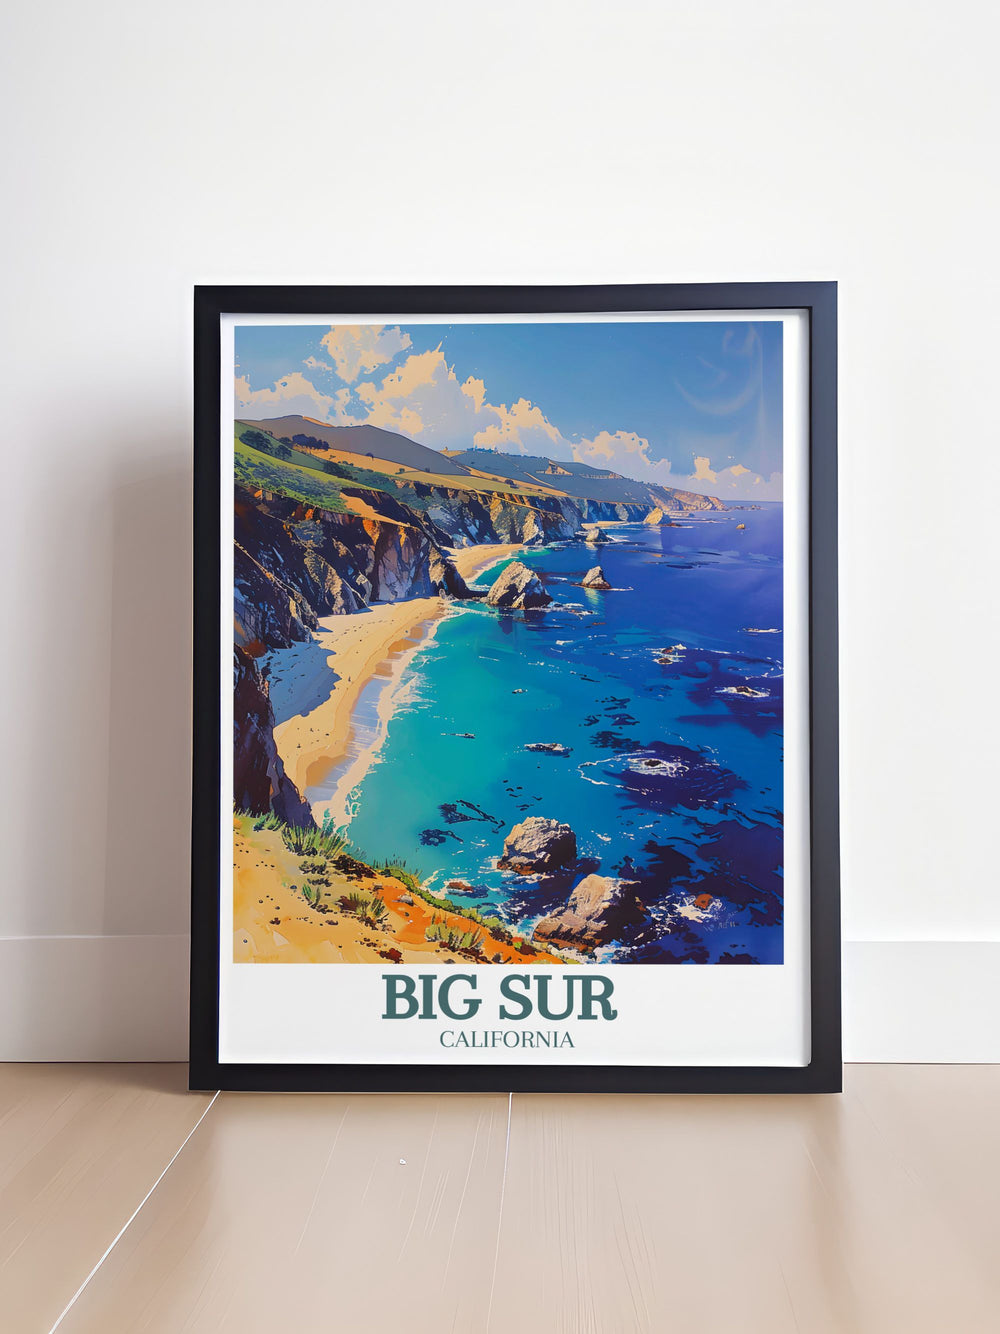 This beautiful art print showcases the natural beauty of Big Sur and the architectural charm of Bixby Creek Bridge, making it a versatile piece for any home decor.